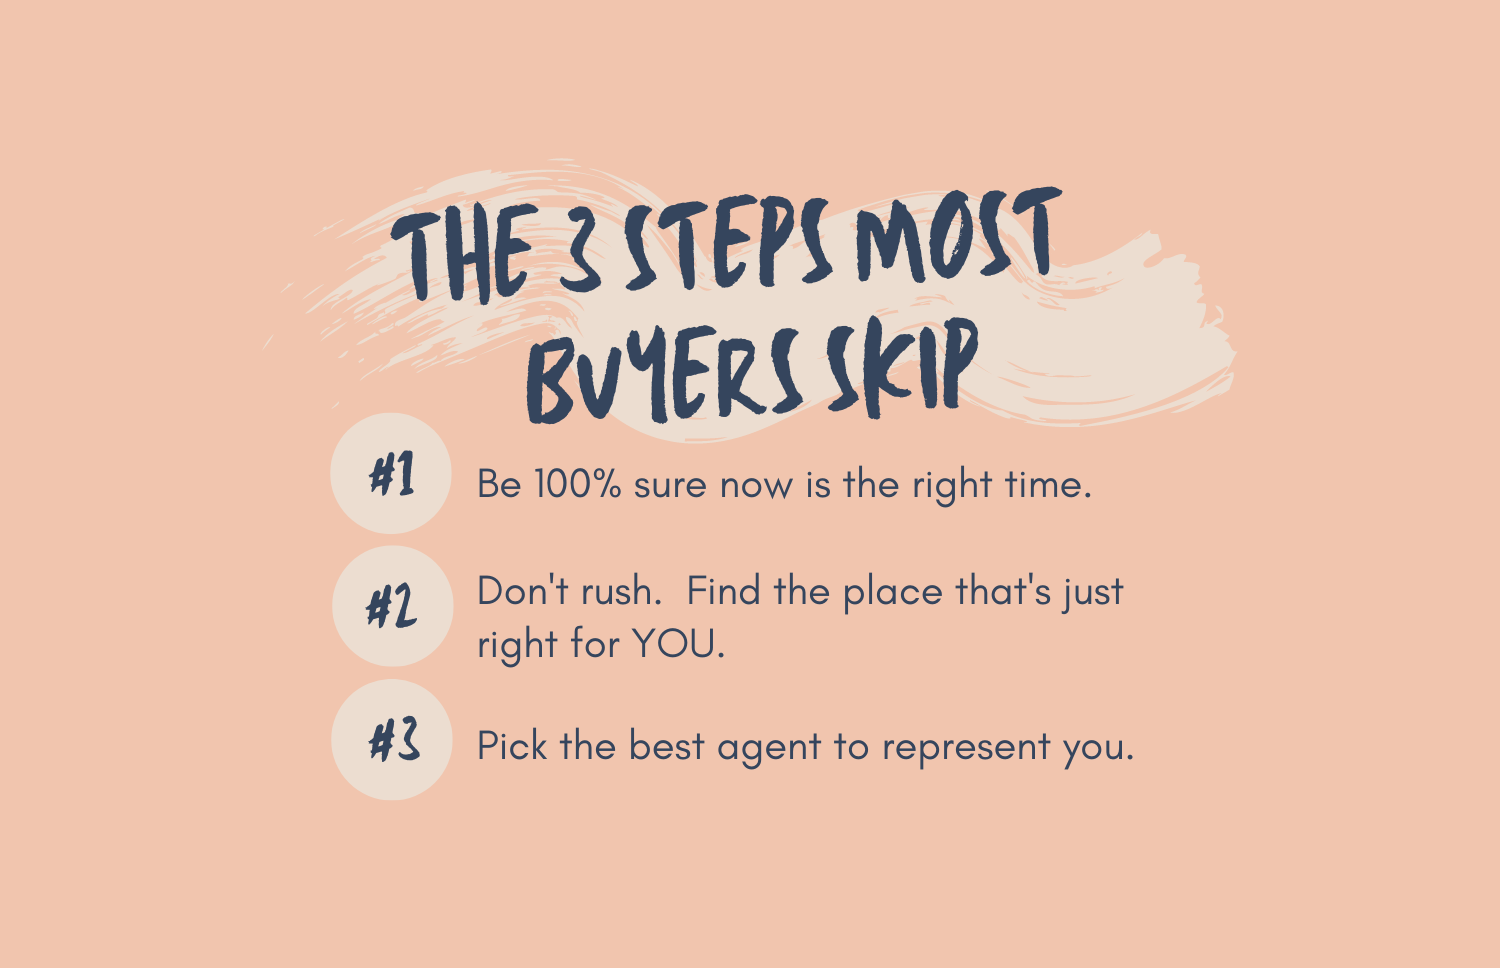 The 3 Steps Most Buyers Skip